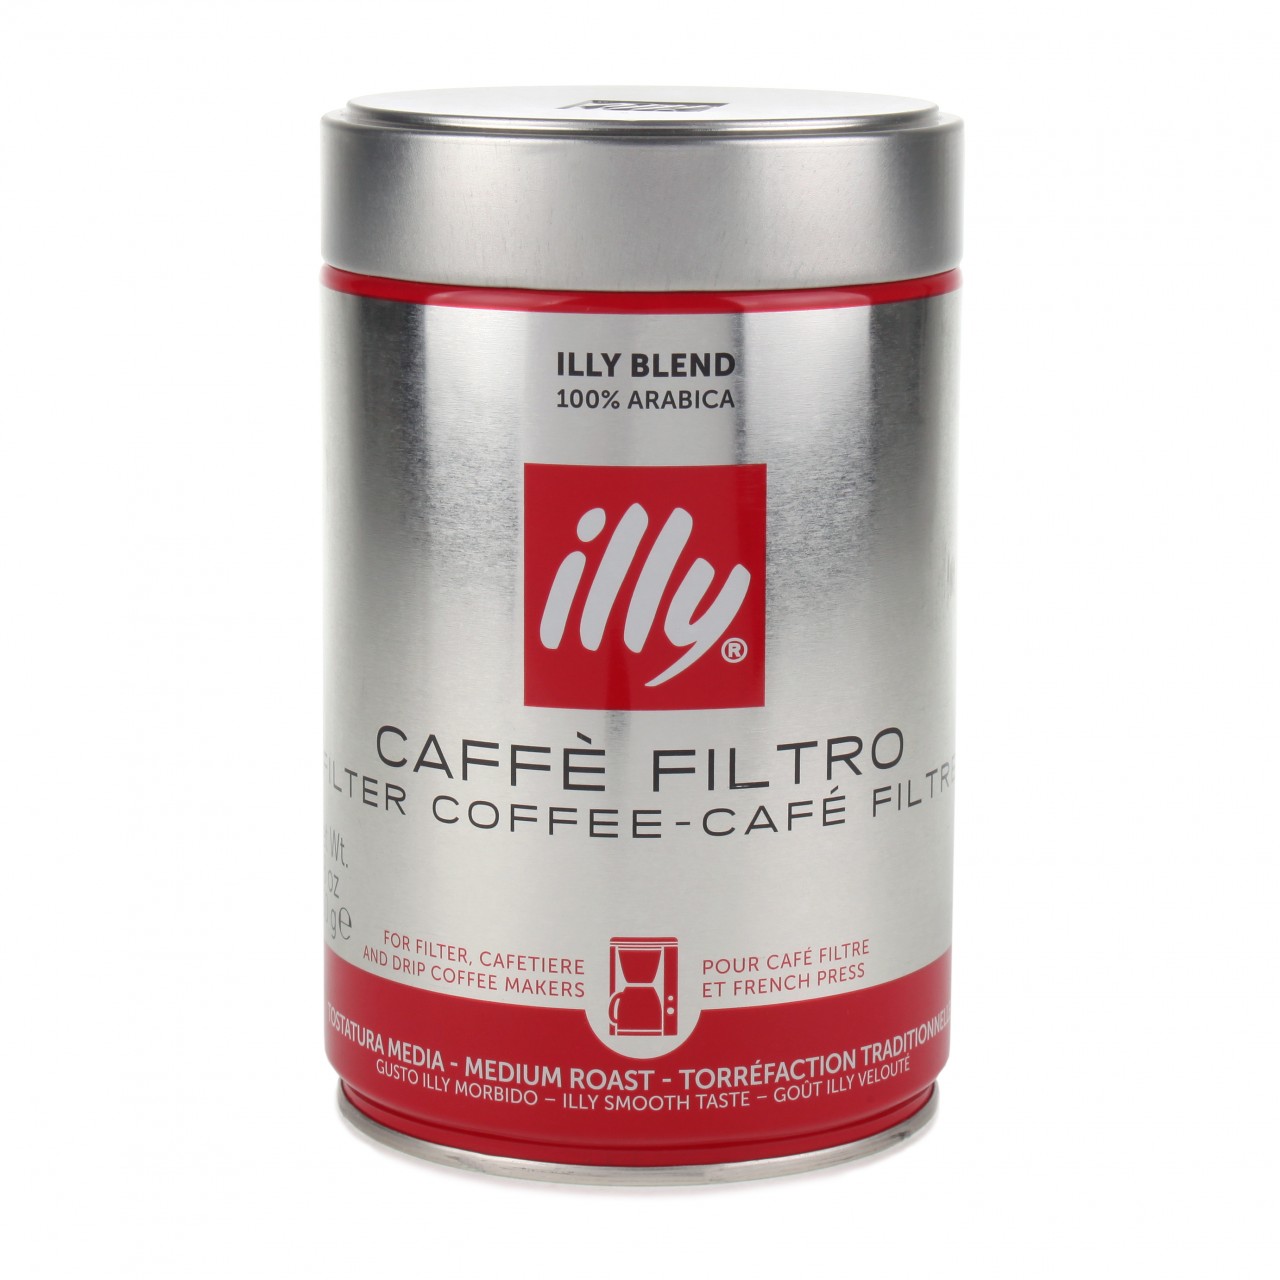 Illy Classico Filter Coffee Normal Roasting